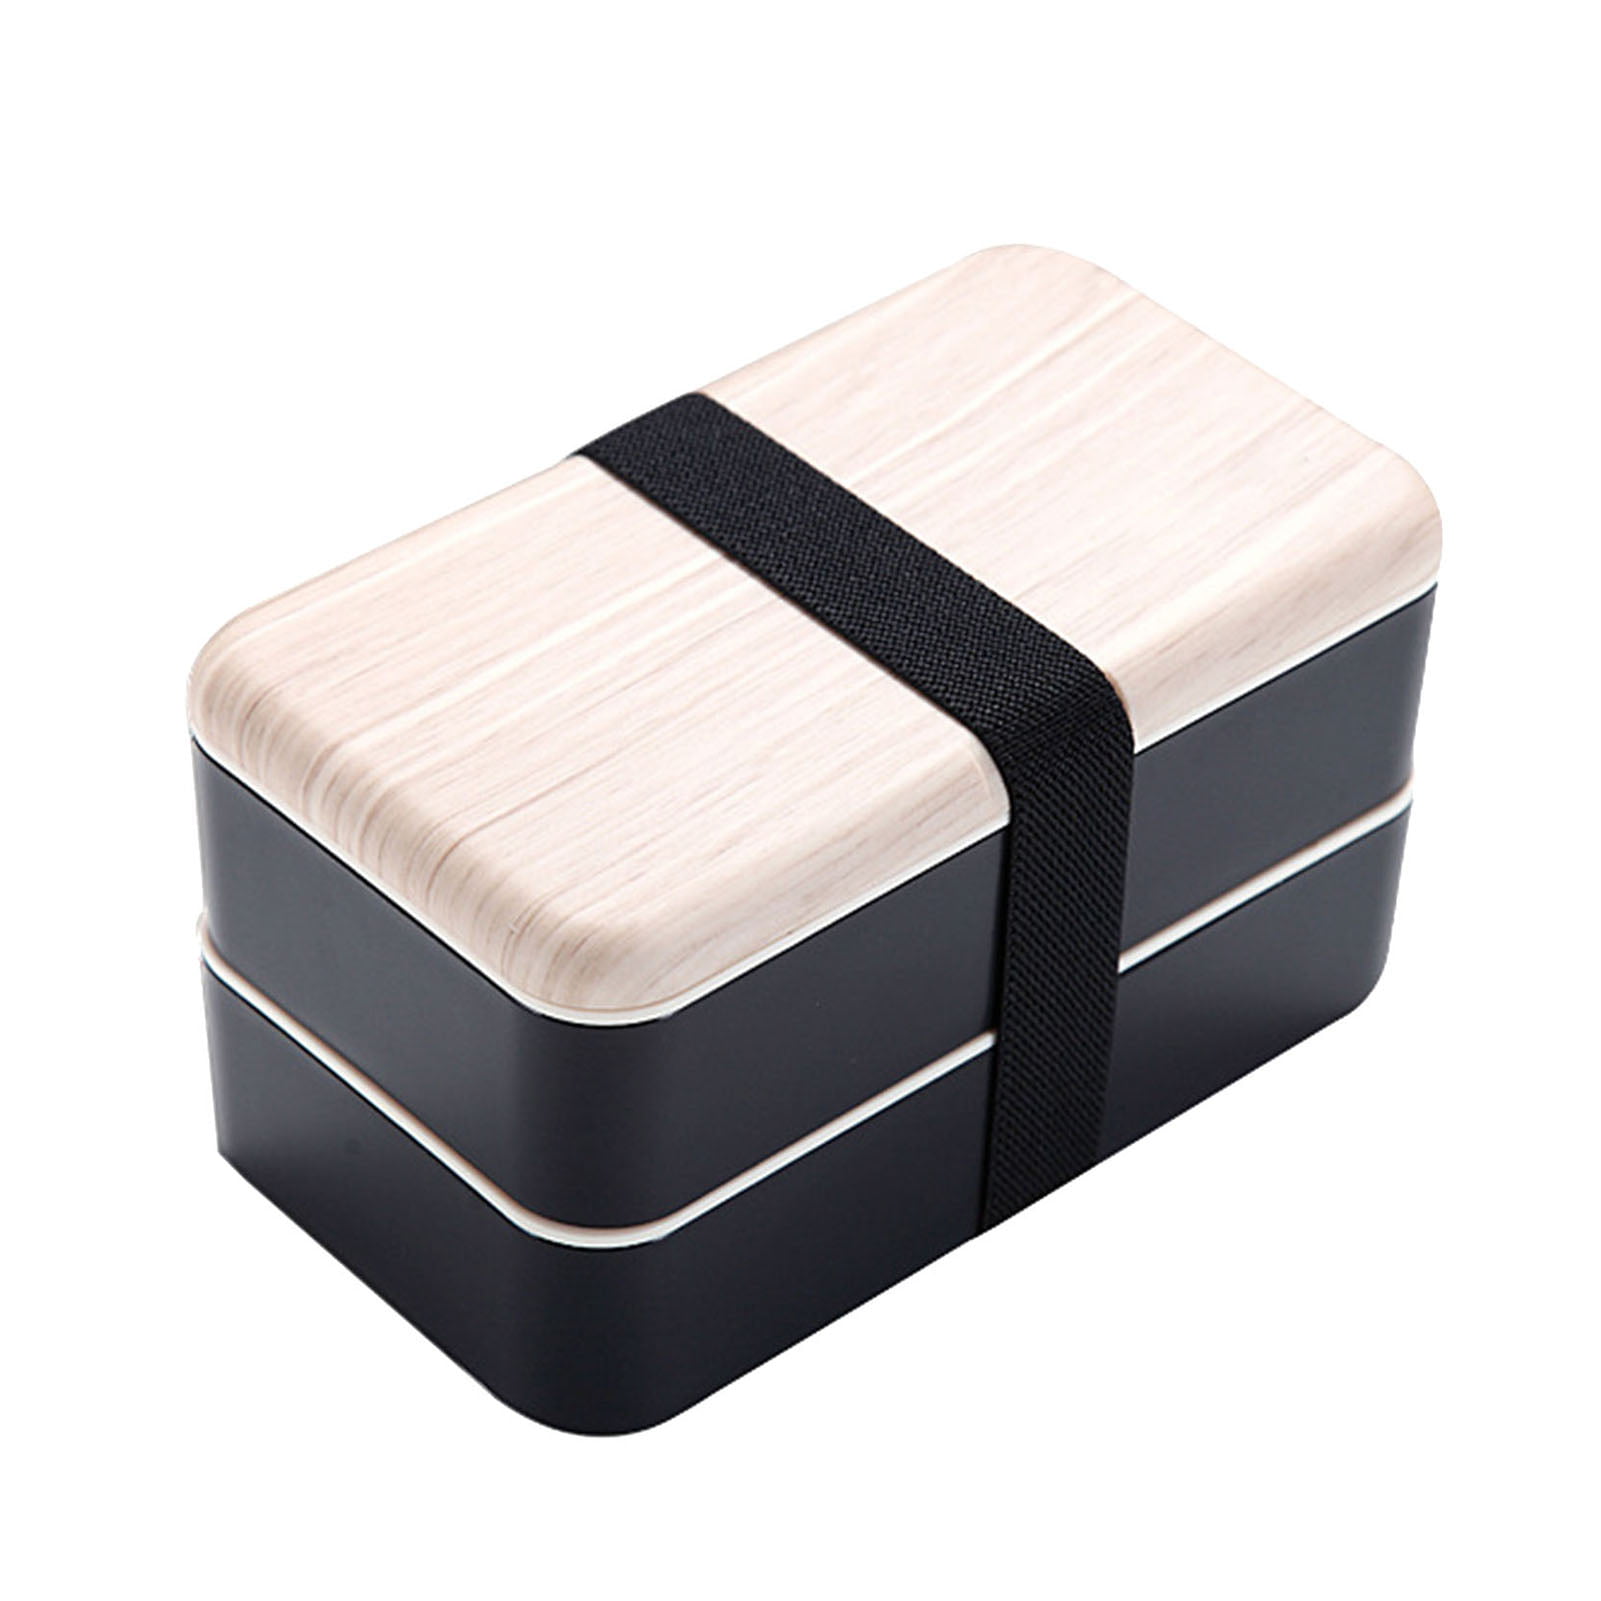 Wheat Plastic Bento Box Double Office Work Students Working Adults Lunch Box  With Cutlery Square Lunch Box Japanese Wooden Cover Bento Box Send Cutlery  Compartment Microwave Wooden Cover Compartment Plastic Bento Box